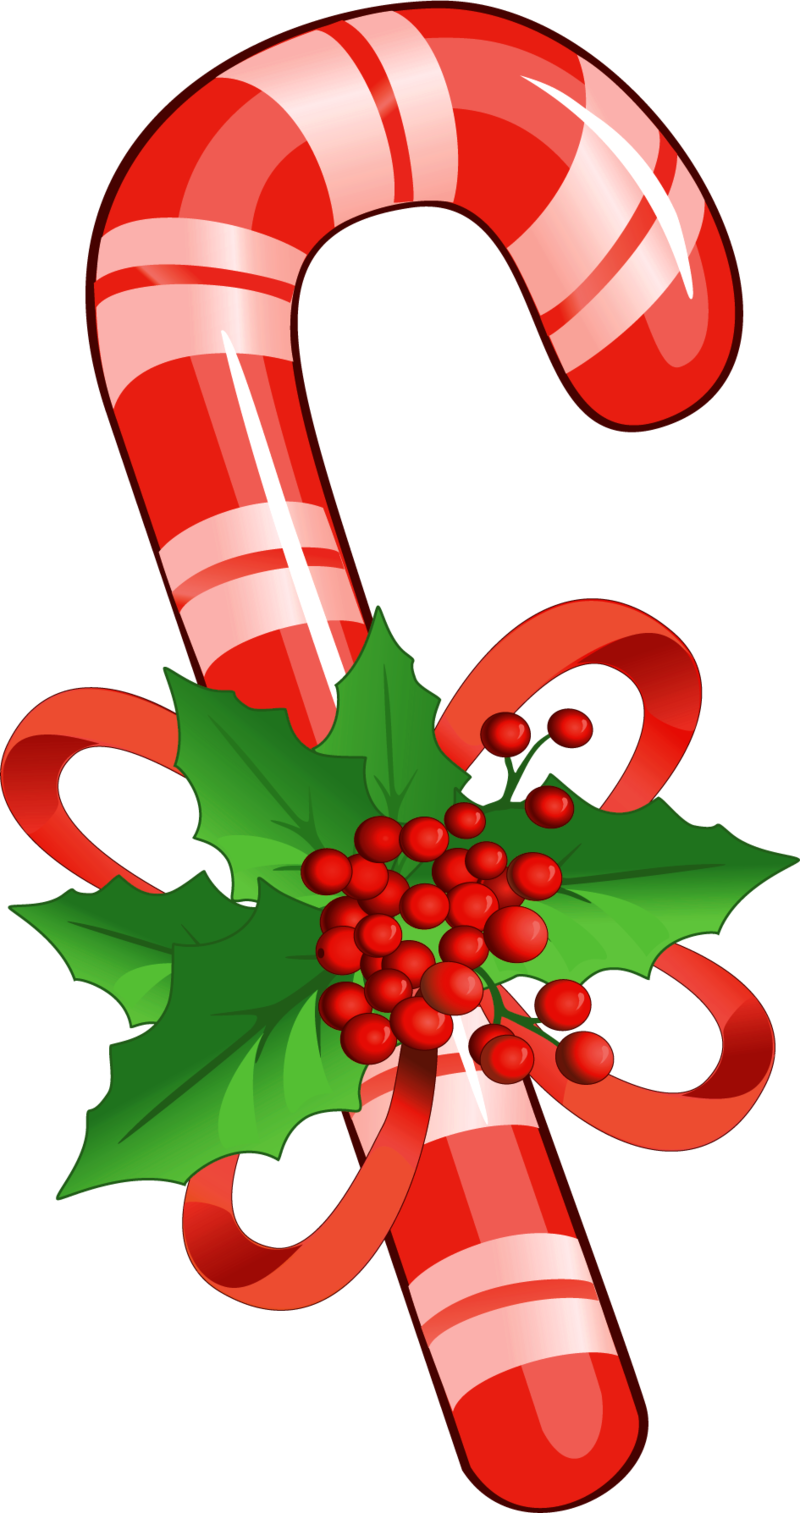 Candy_Cane_with_Mistletoe_PNG_Clipart.png